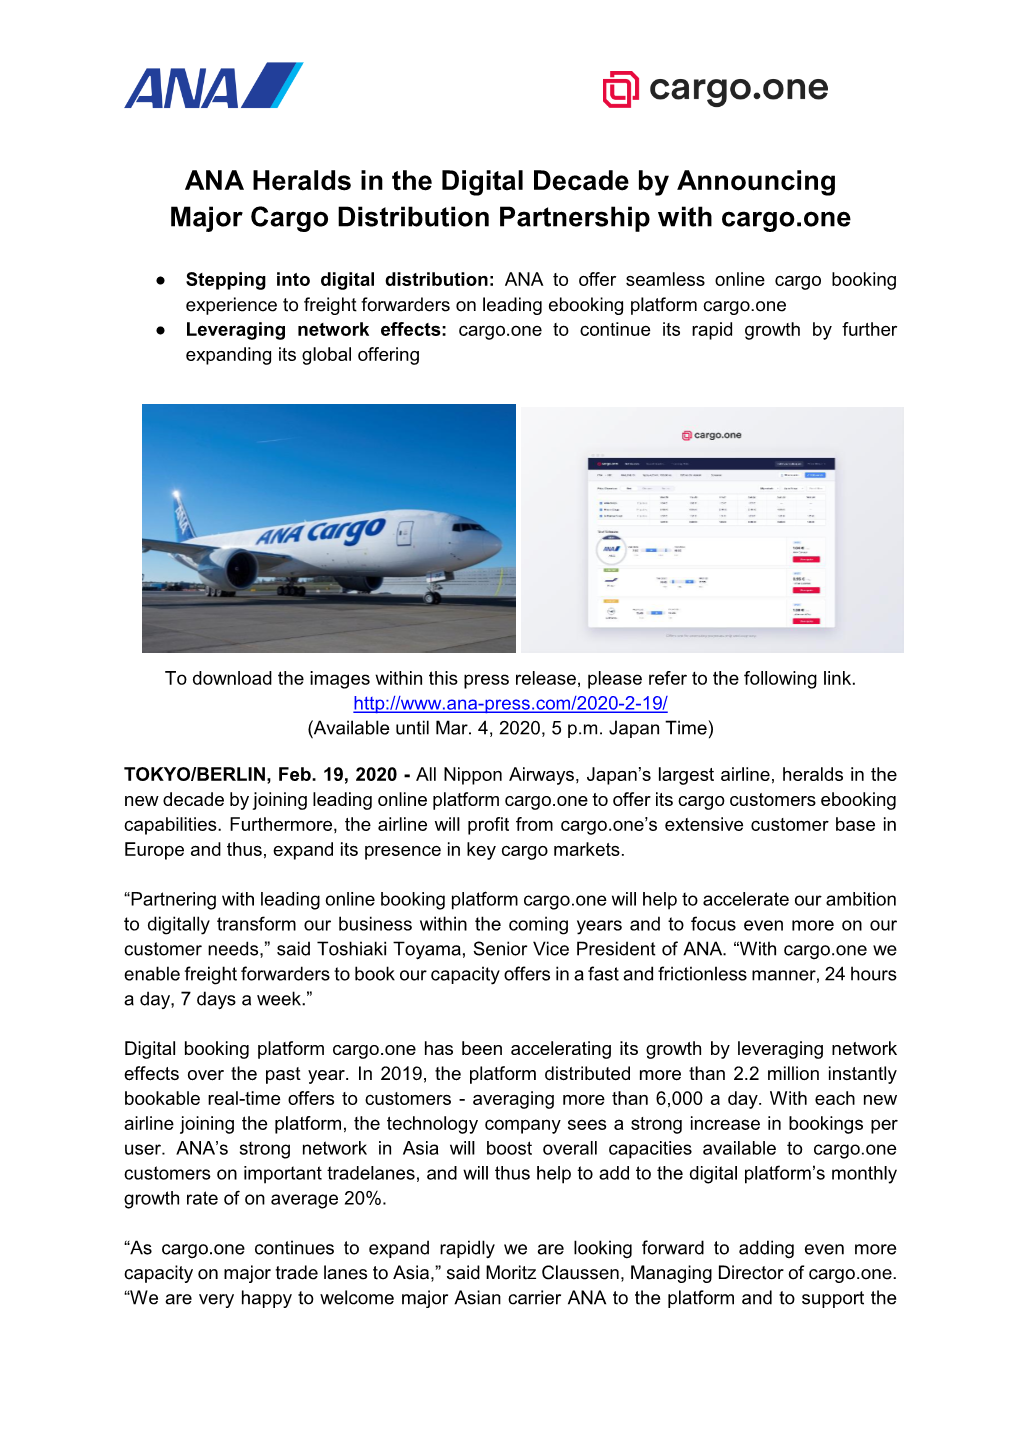 ANA Heralds in the Digital Decade by Announcing Major Cargo Distribution Partnership with Cargo.One